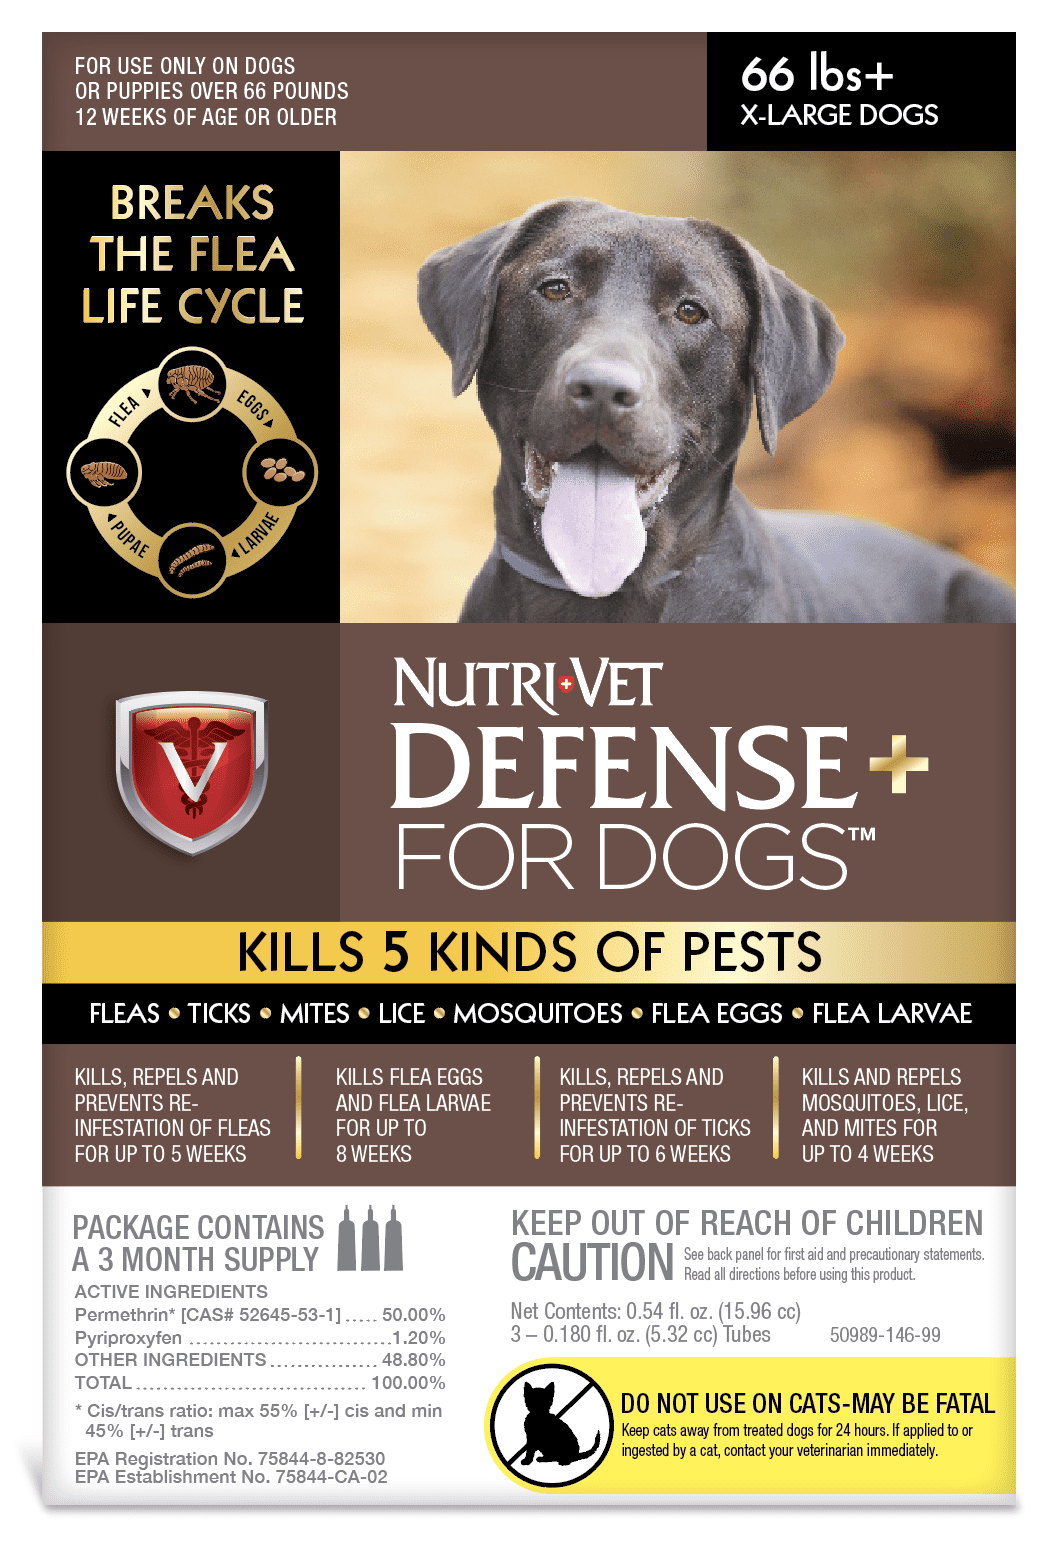 Nutri-Vet K9 Defense Plus for Dogs Flea & Tick and More Extra Large 66